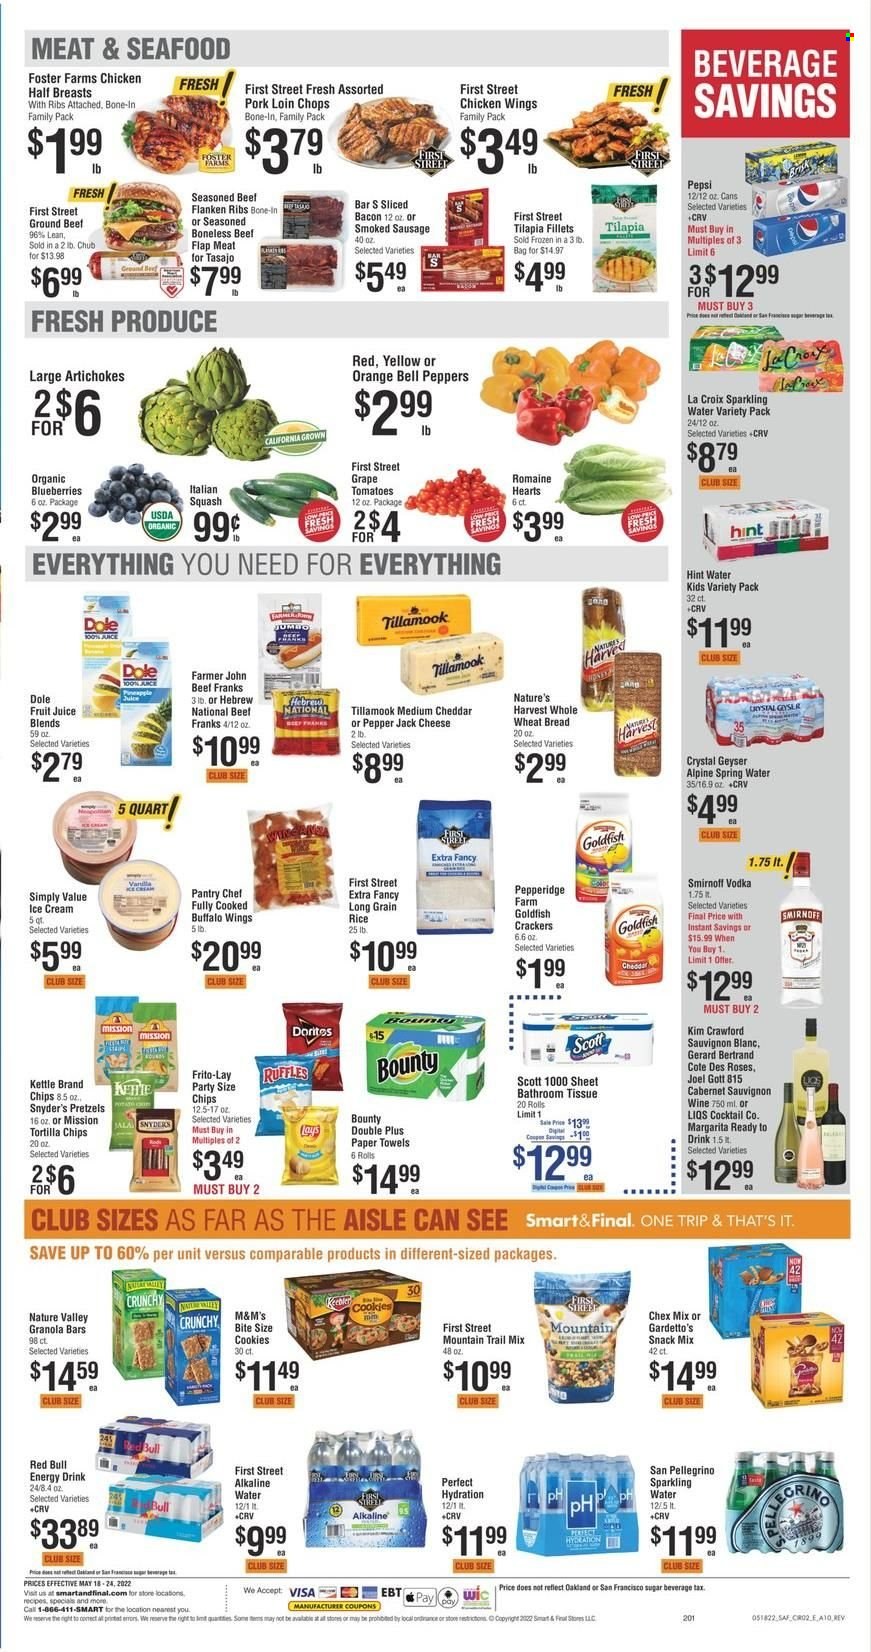 thumbnail - Smart & Final Flyer - 05/18/2022 - 05/24/2022 - Sales products - wheat bread, pretzels, artichoke, bell peppers, tomatoes, Dole, peppers, blueberries, oranges, tilapia, seafood, bacon, smoked sausage, Pepper Jack cheese, cheese, ice cream, chicken wings, cookies, snack, Bounty, M&M's, crackers, Keebler, Doritos, tortilla chips, Goldfish, Frito-Lay, Ruffles, Chex Mix, sugar, granola bar, Nature Valley, rice, long grain rice, trail mix, Pepsi, juice, fruit juice, energy drink, Red Bull, spring water, sparkling water, alkaline water, San Pellegrino, Cabernet Sauvignon, red wine, white wine, wine, Sauvignon Blanc, Smirnoff, vodka, pork chops, pork loin, pork meat, bath tissue, Scott, kitchen towels, paper towels. Page 2.